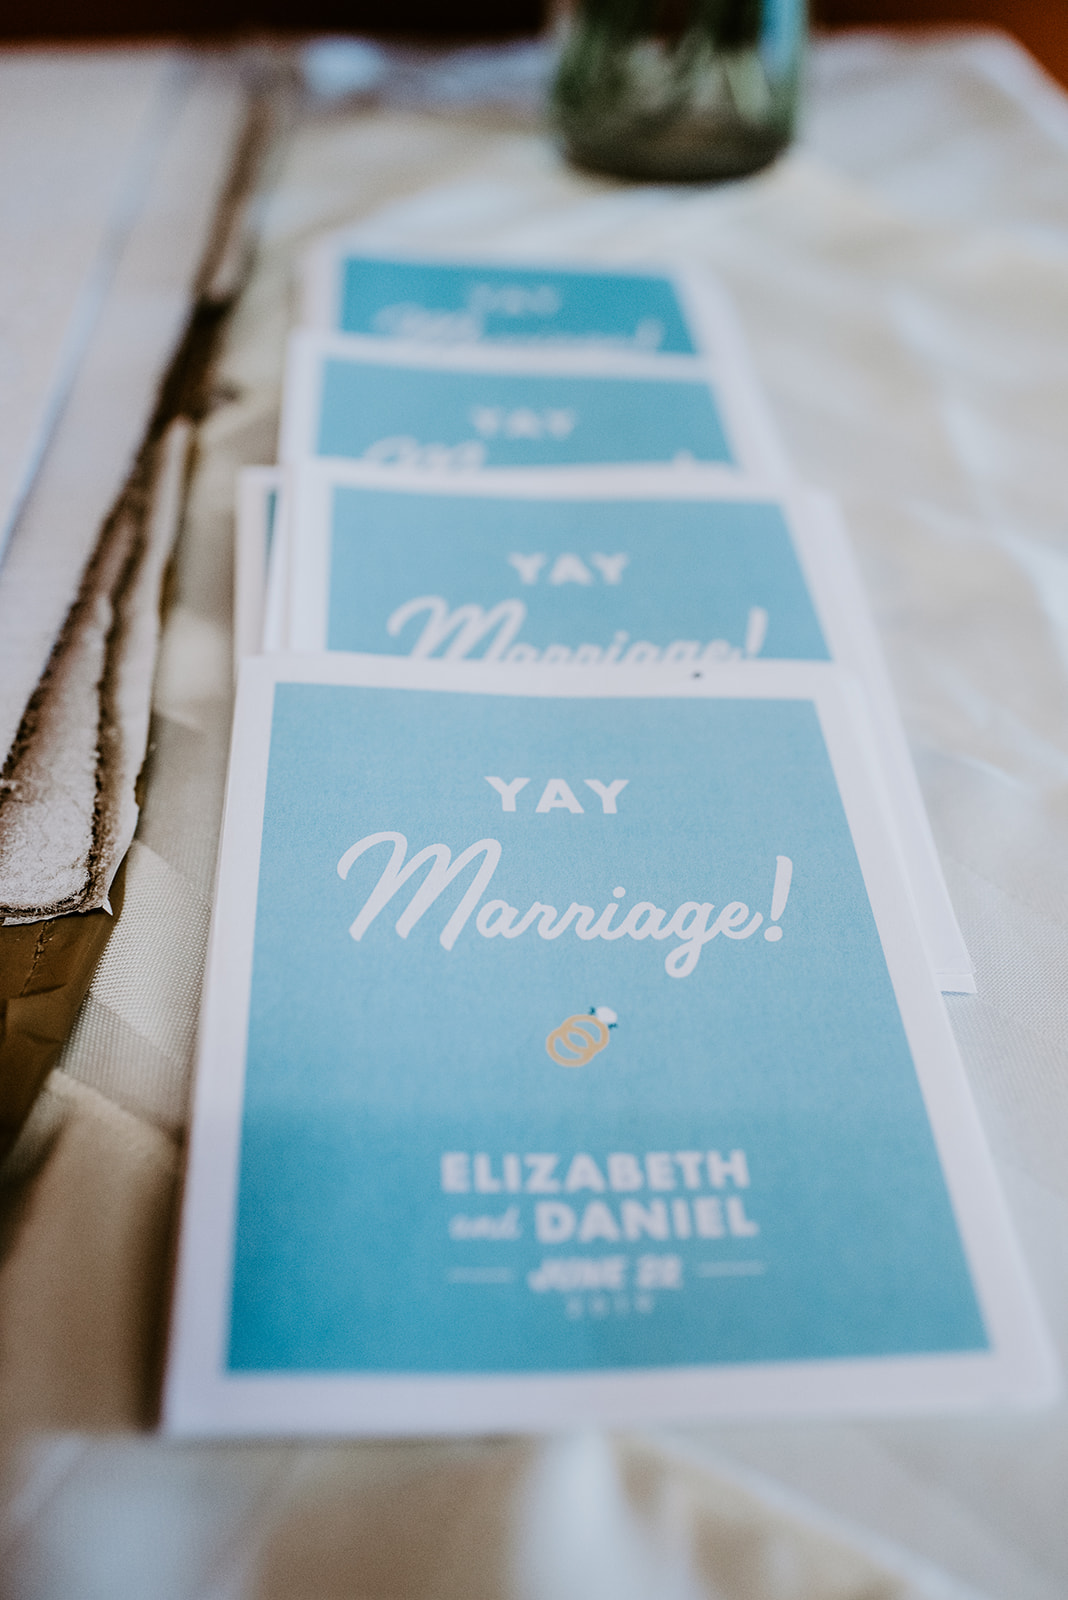 Elizabeth and Dan's wedding programs teal blue with Yay Marriage written on it